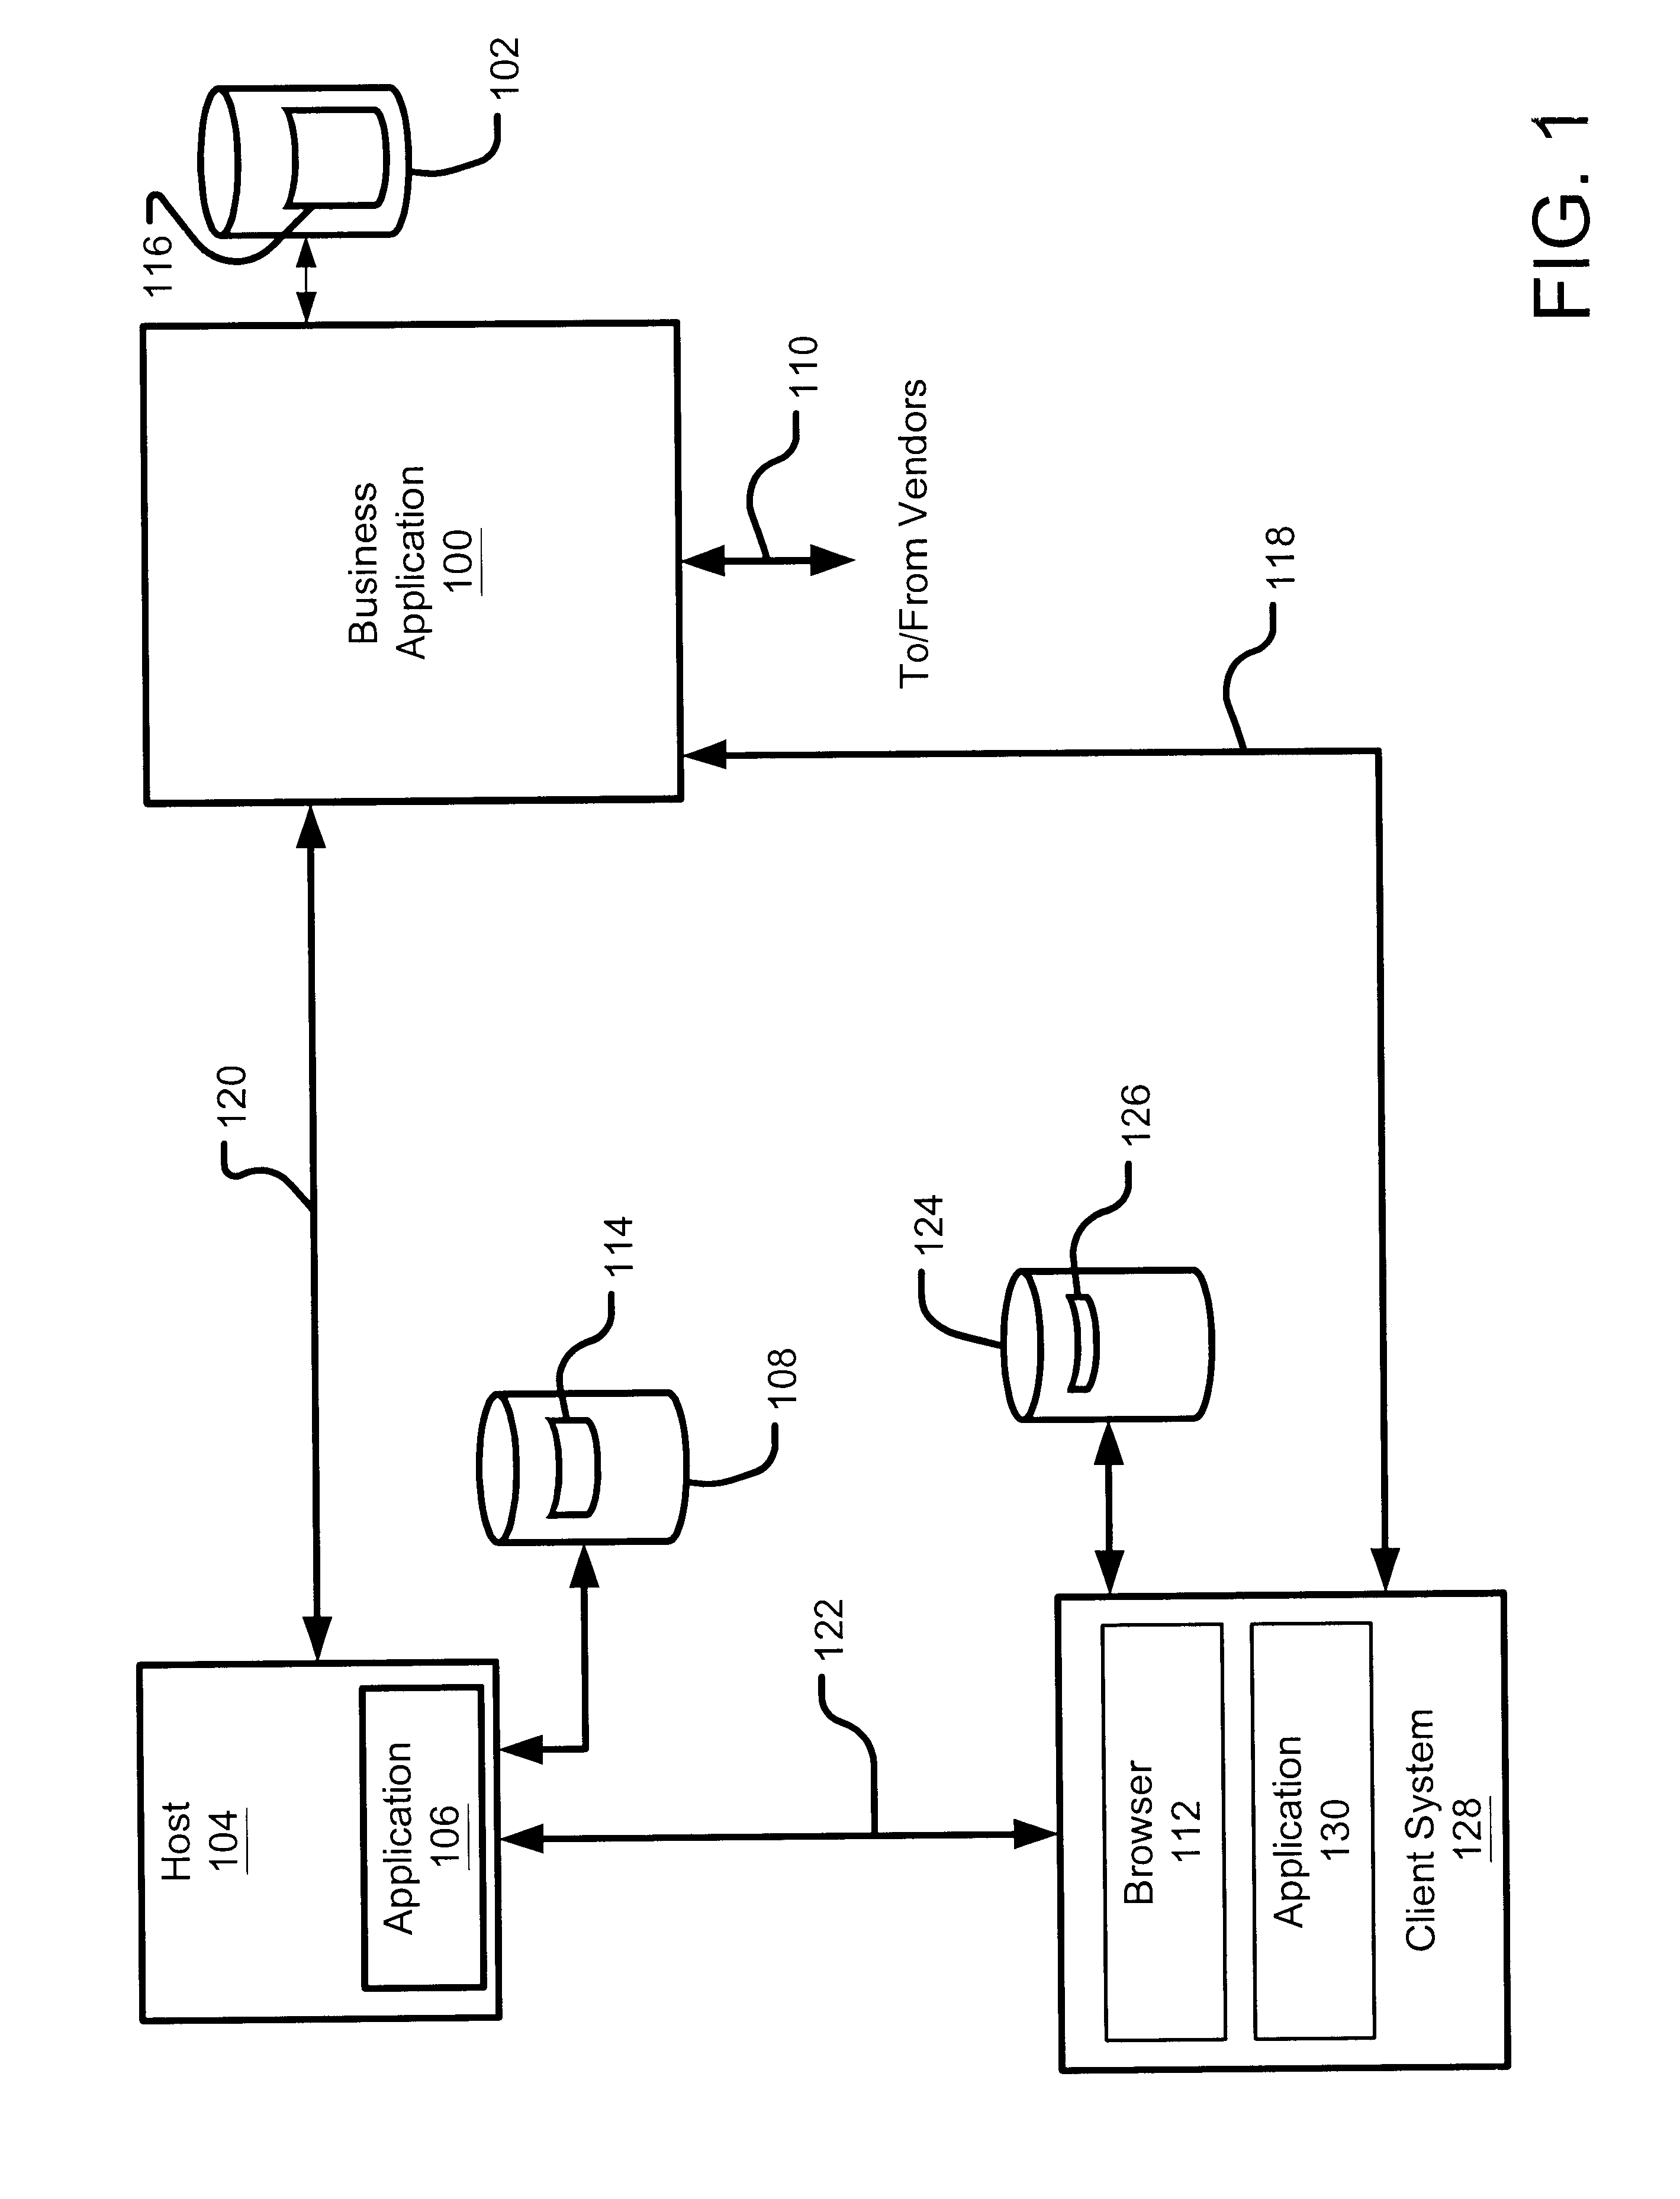 Merchandising system method, and program product utilizing an intermittent network connection